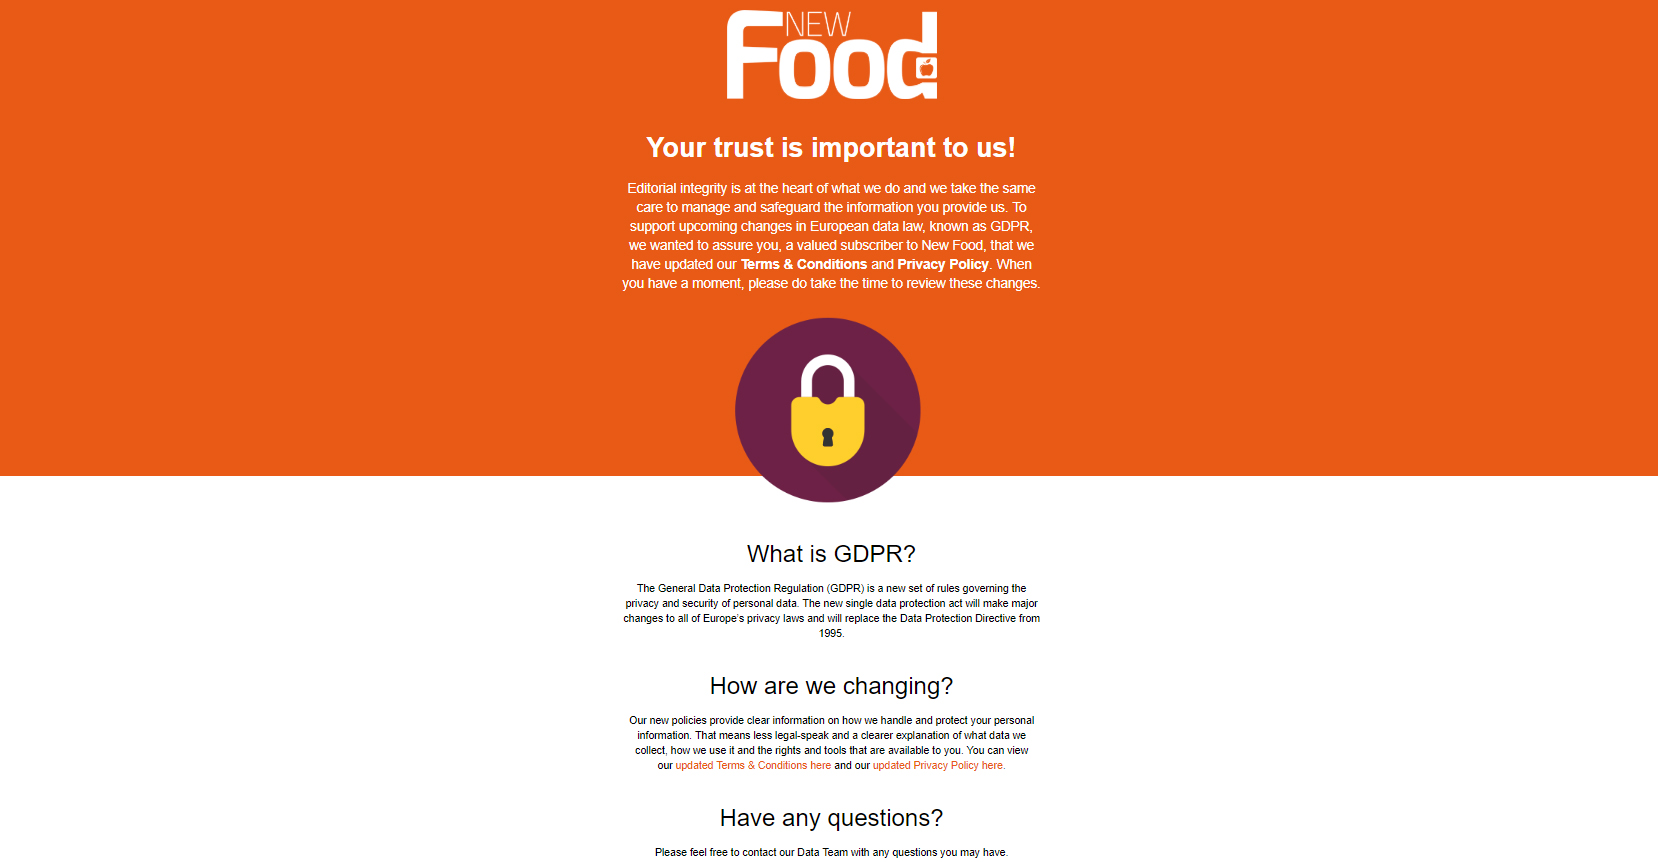 New Food GDPR email